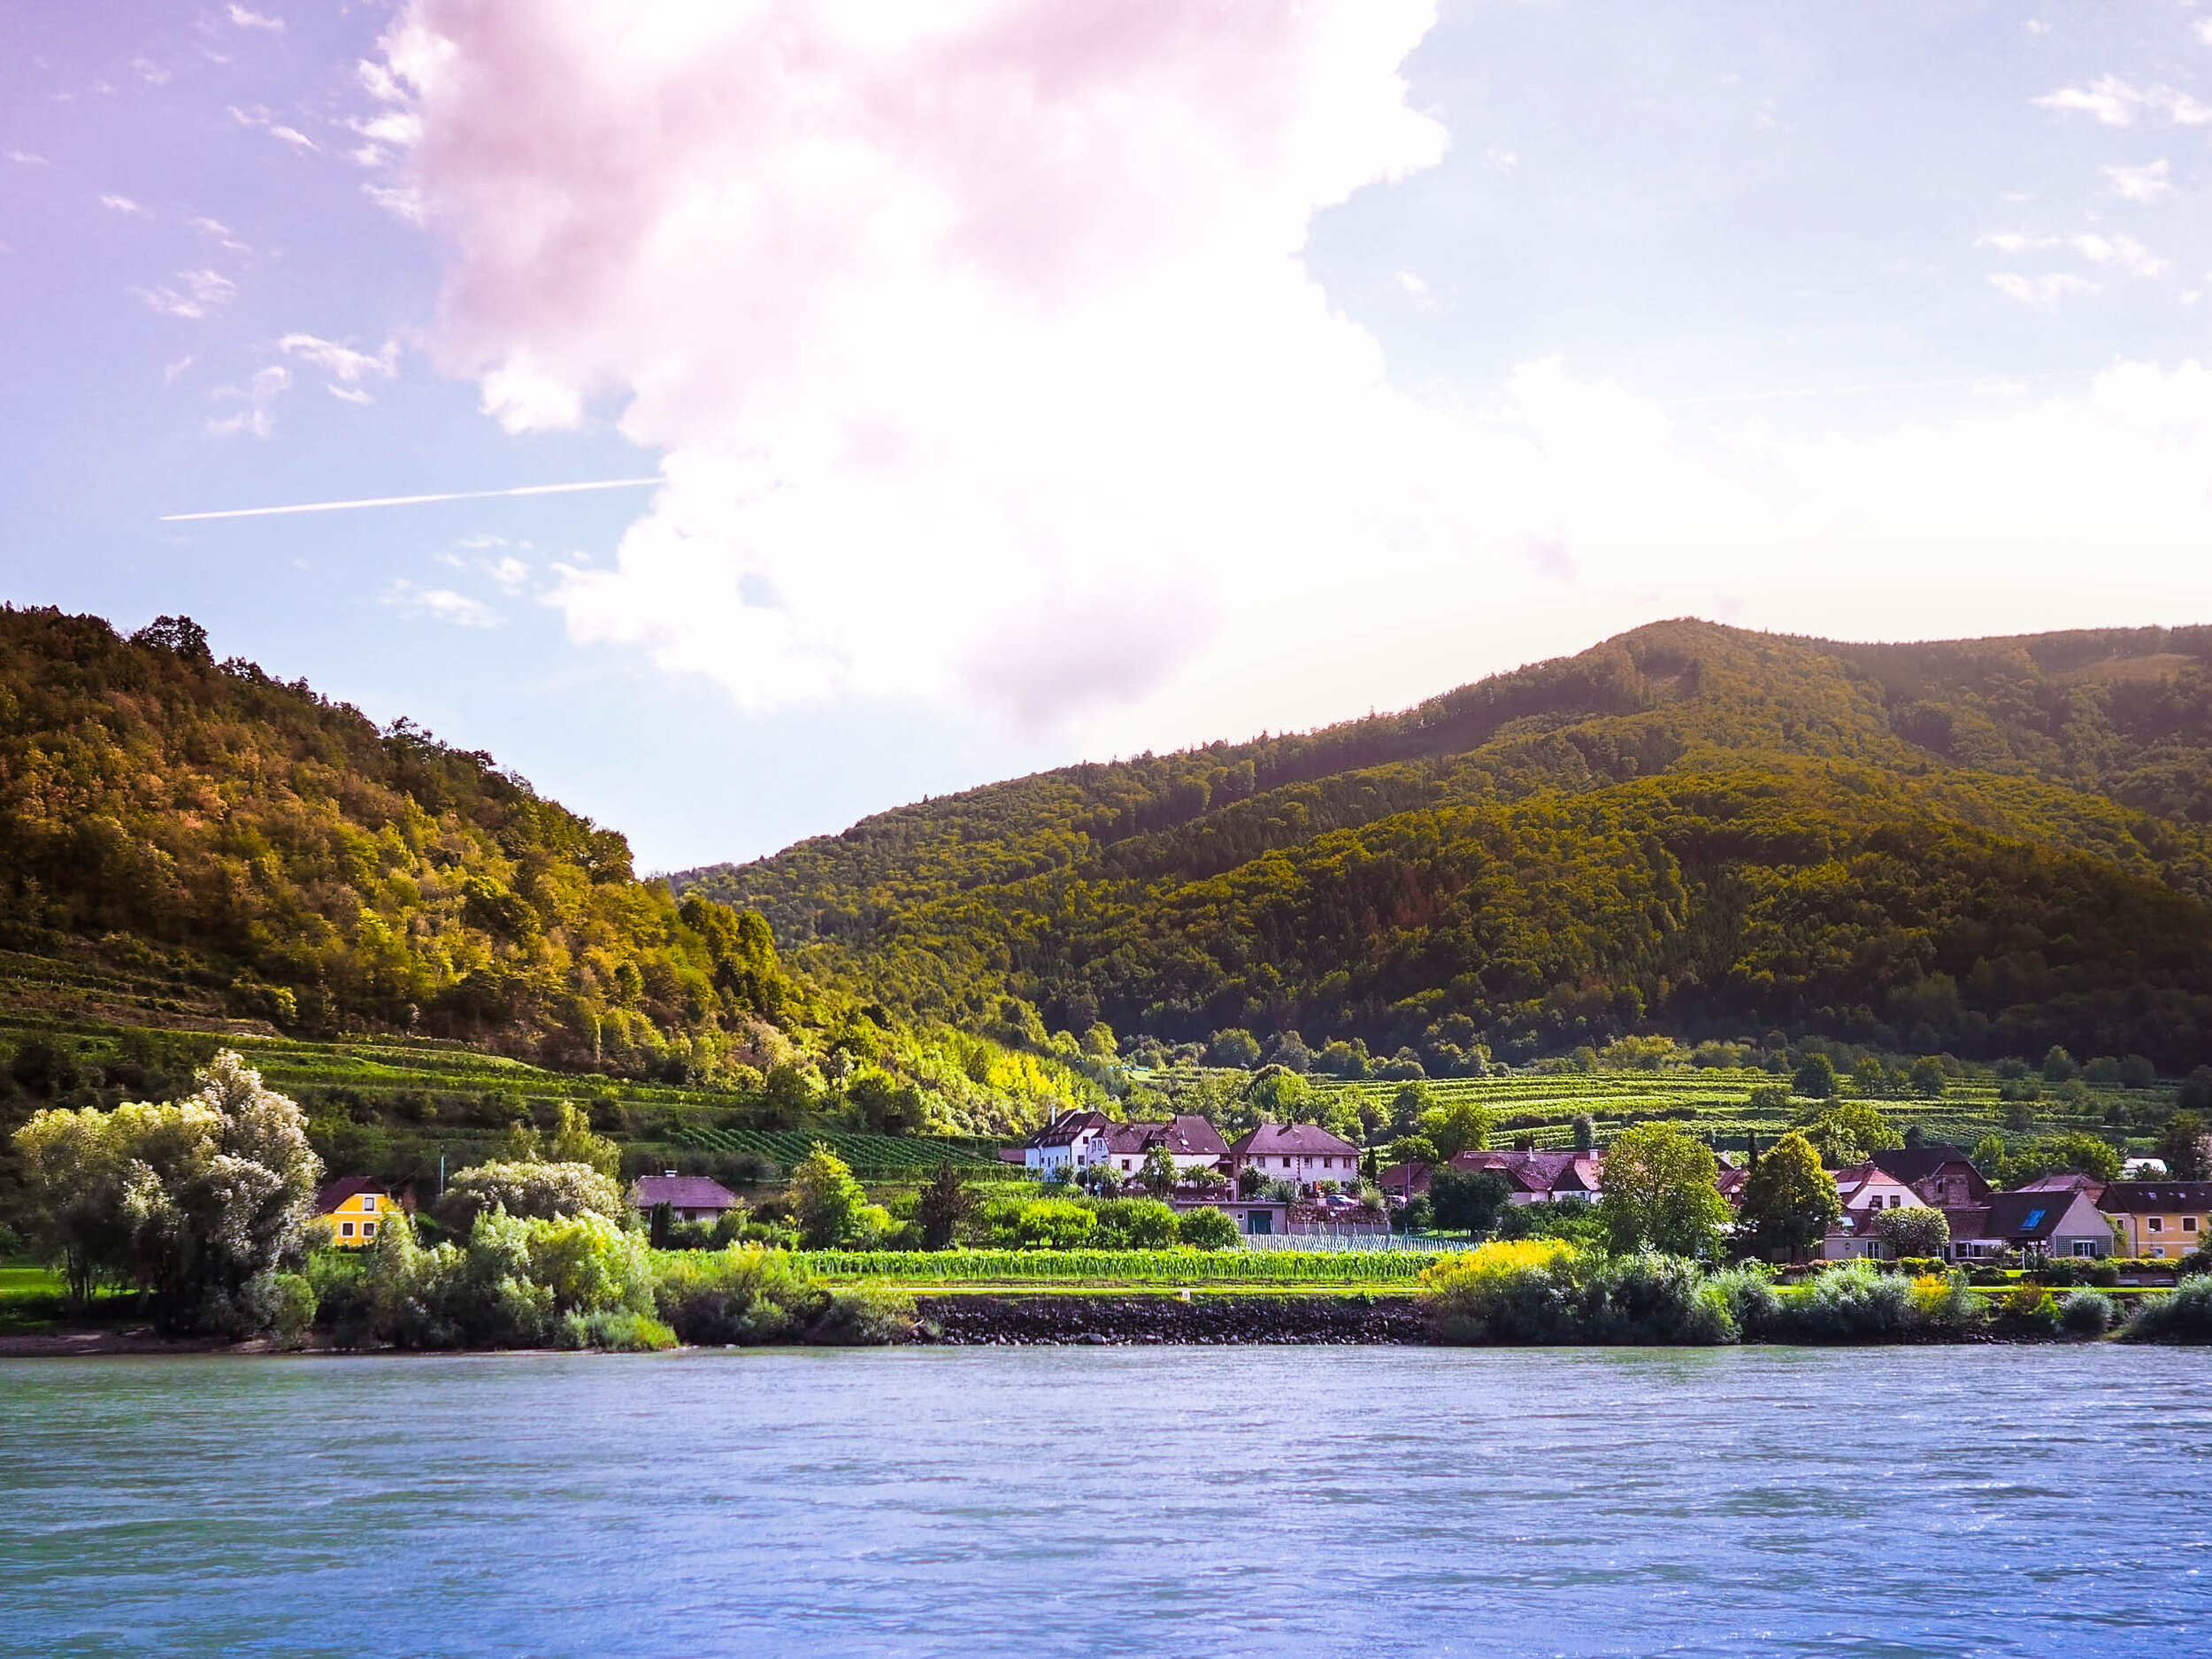 Scenic cruise along the Danube is what European fairytales are made of. (PHOTO BY BIANCA BUSTOS-VELAZQUEZ)